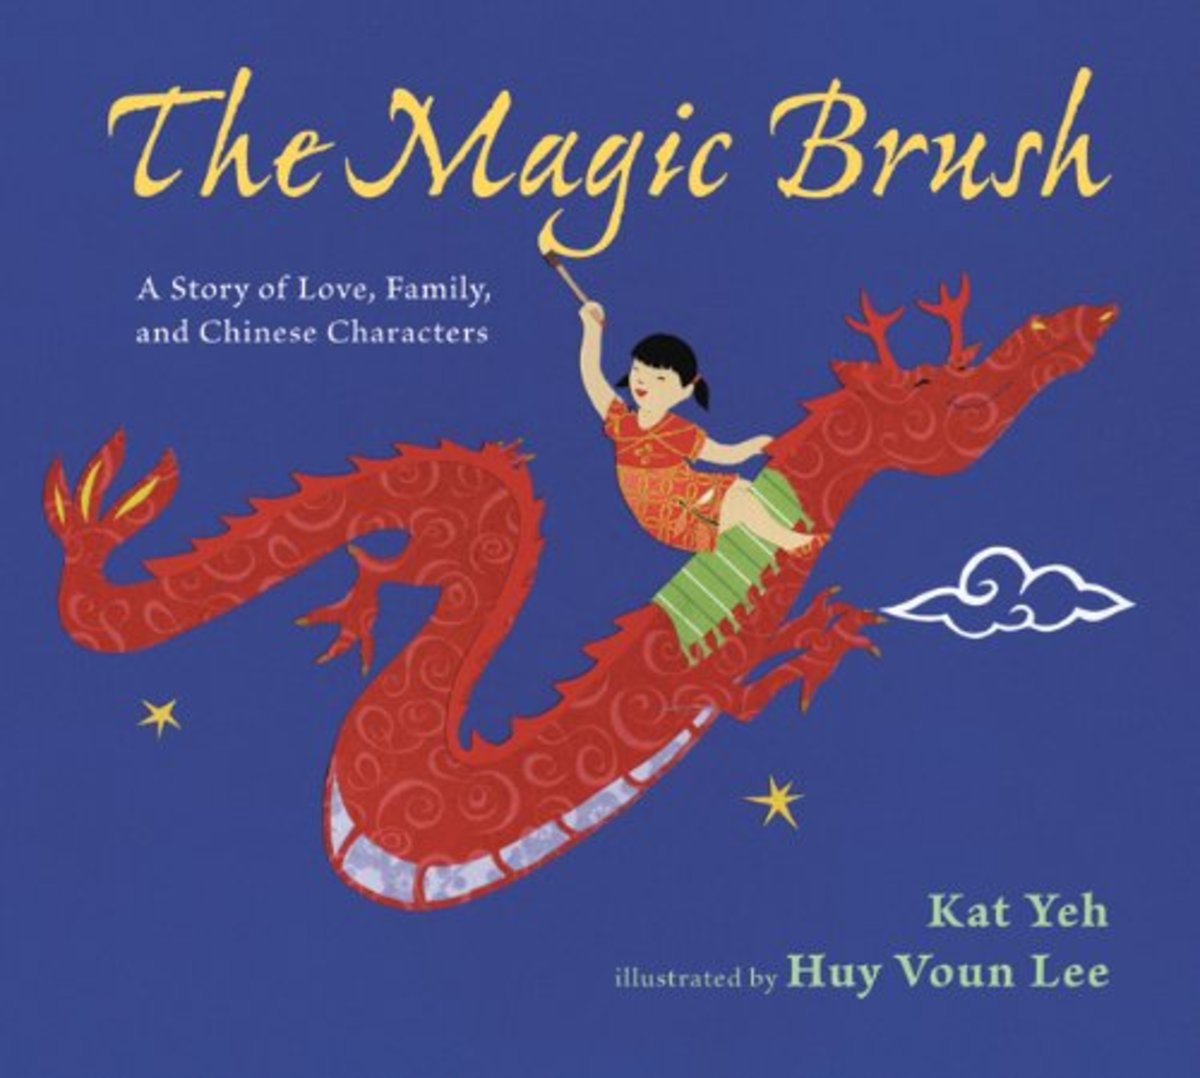 The Magic Brush by Kat Yeh